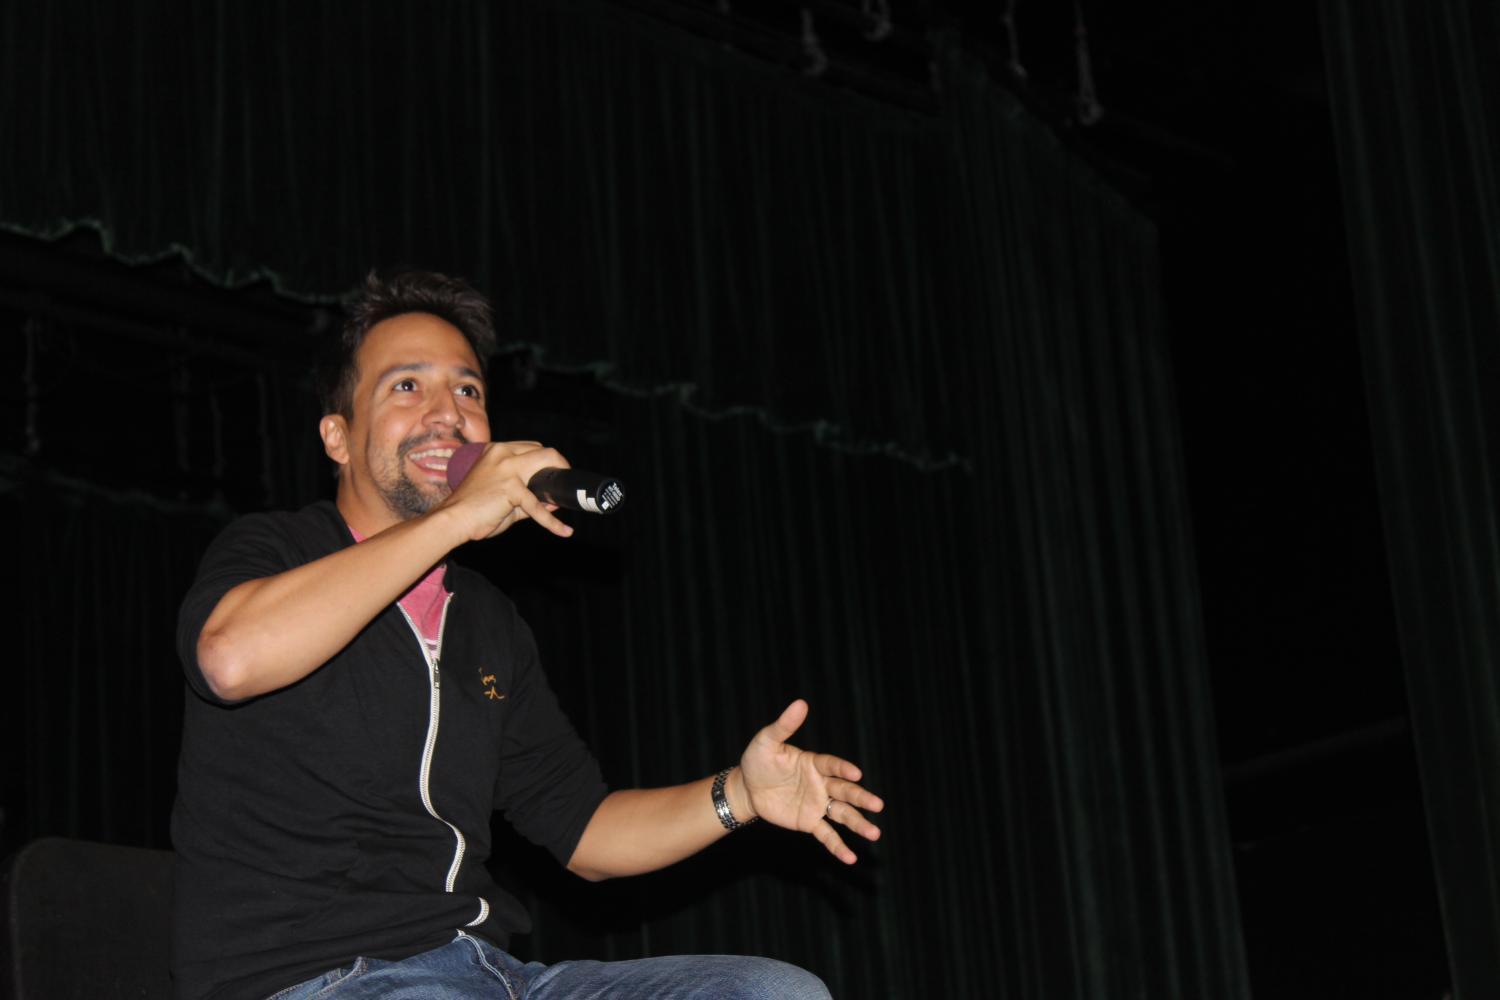 Lin-Manuel Miranda shares his thoughts at a question and answer session with students at Panorama High School sponsored by Congressman Tony a Cardenas.